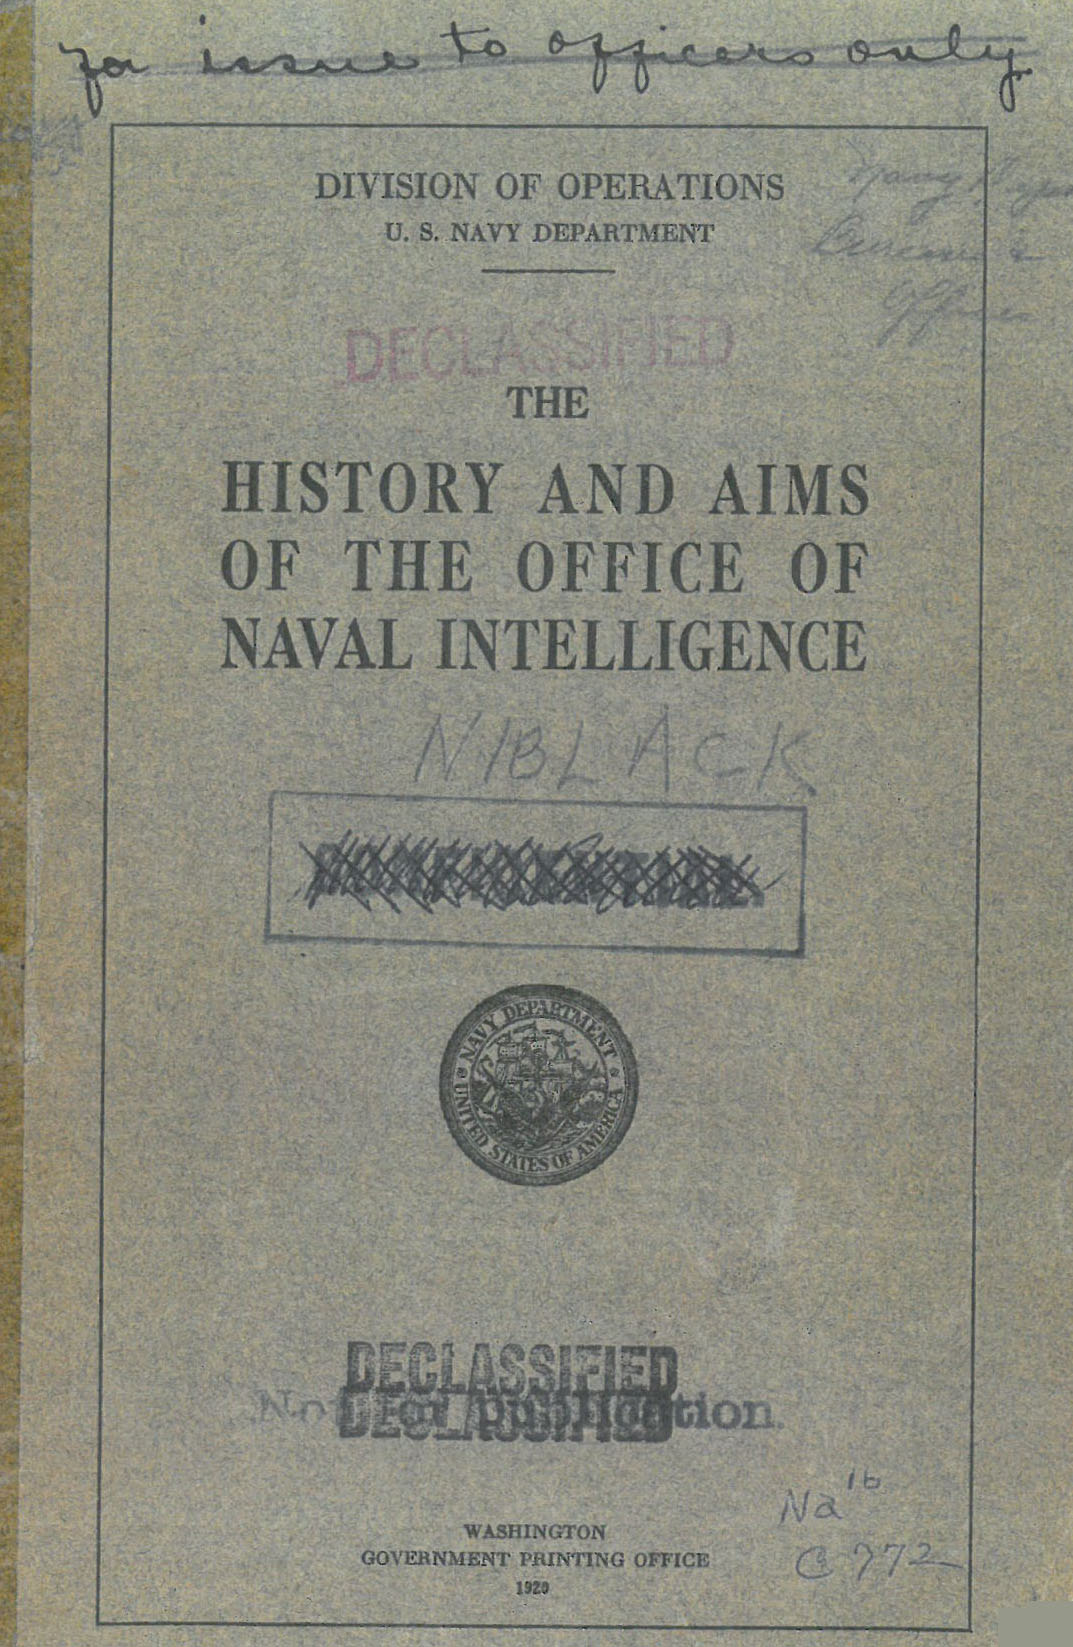 https://www.history.navy.mil/content/dam/nhhc/research/library/online-reading-room/OfficeofNavalIntelligence/Office%20of%20Naval%20Intelligence%20cvr.jpg